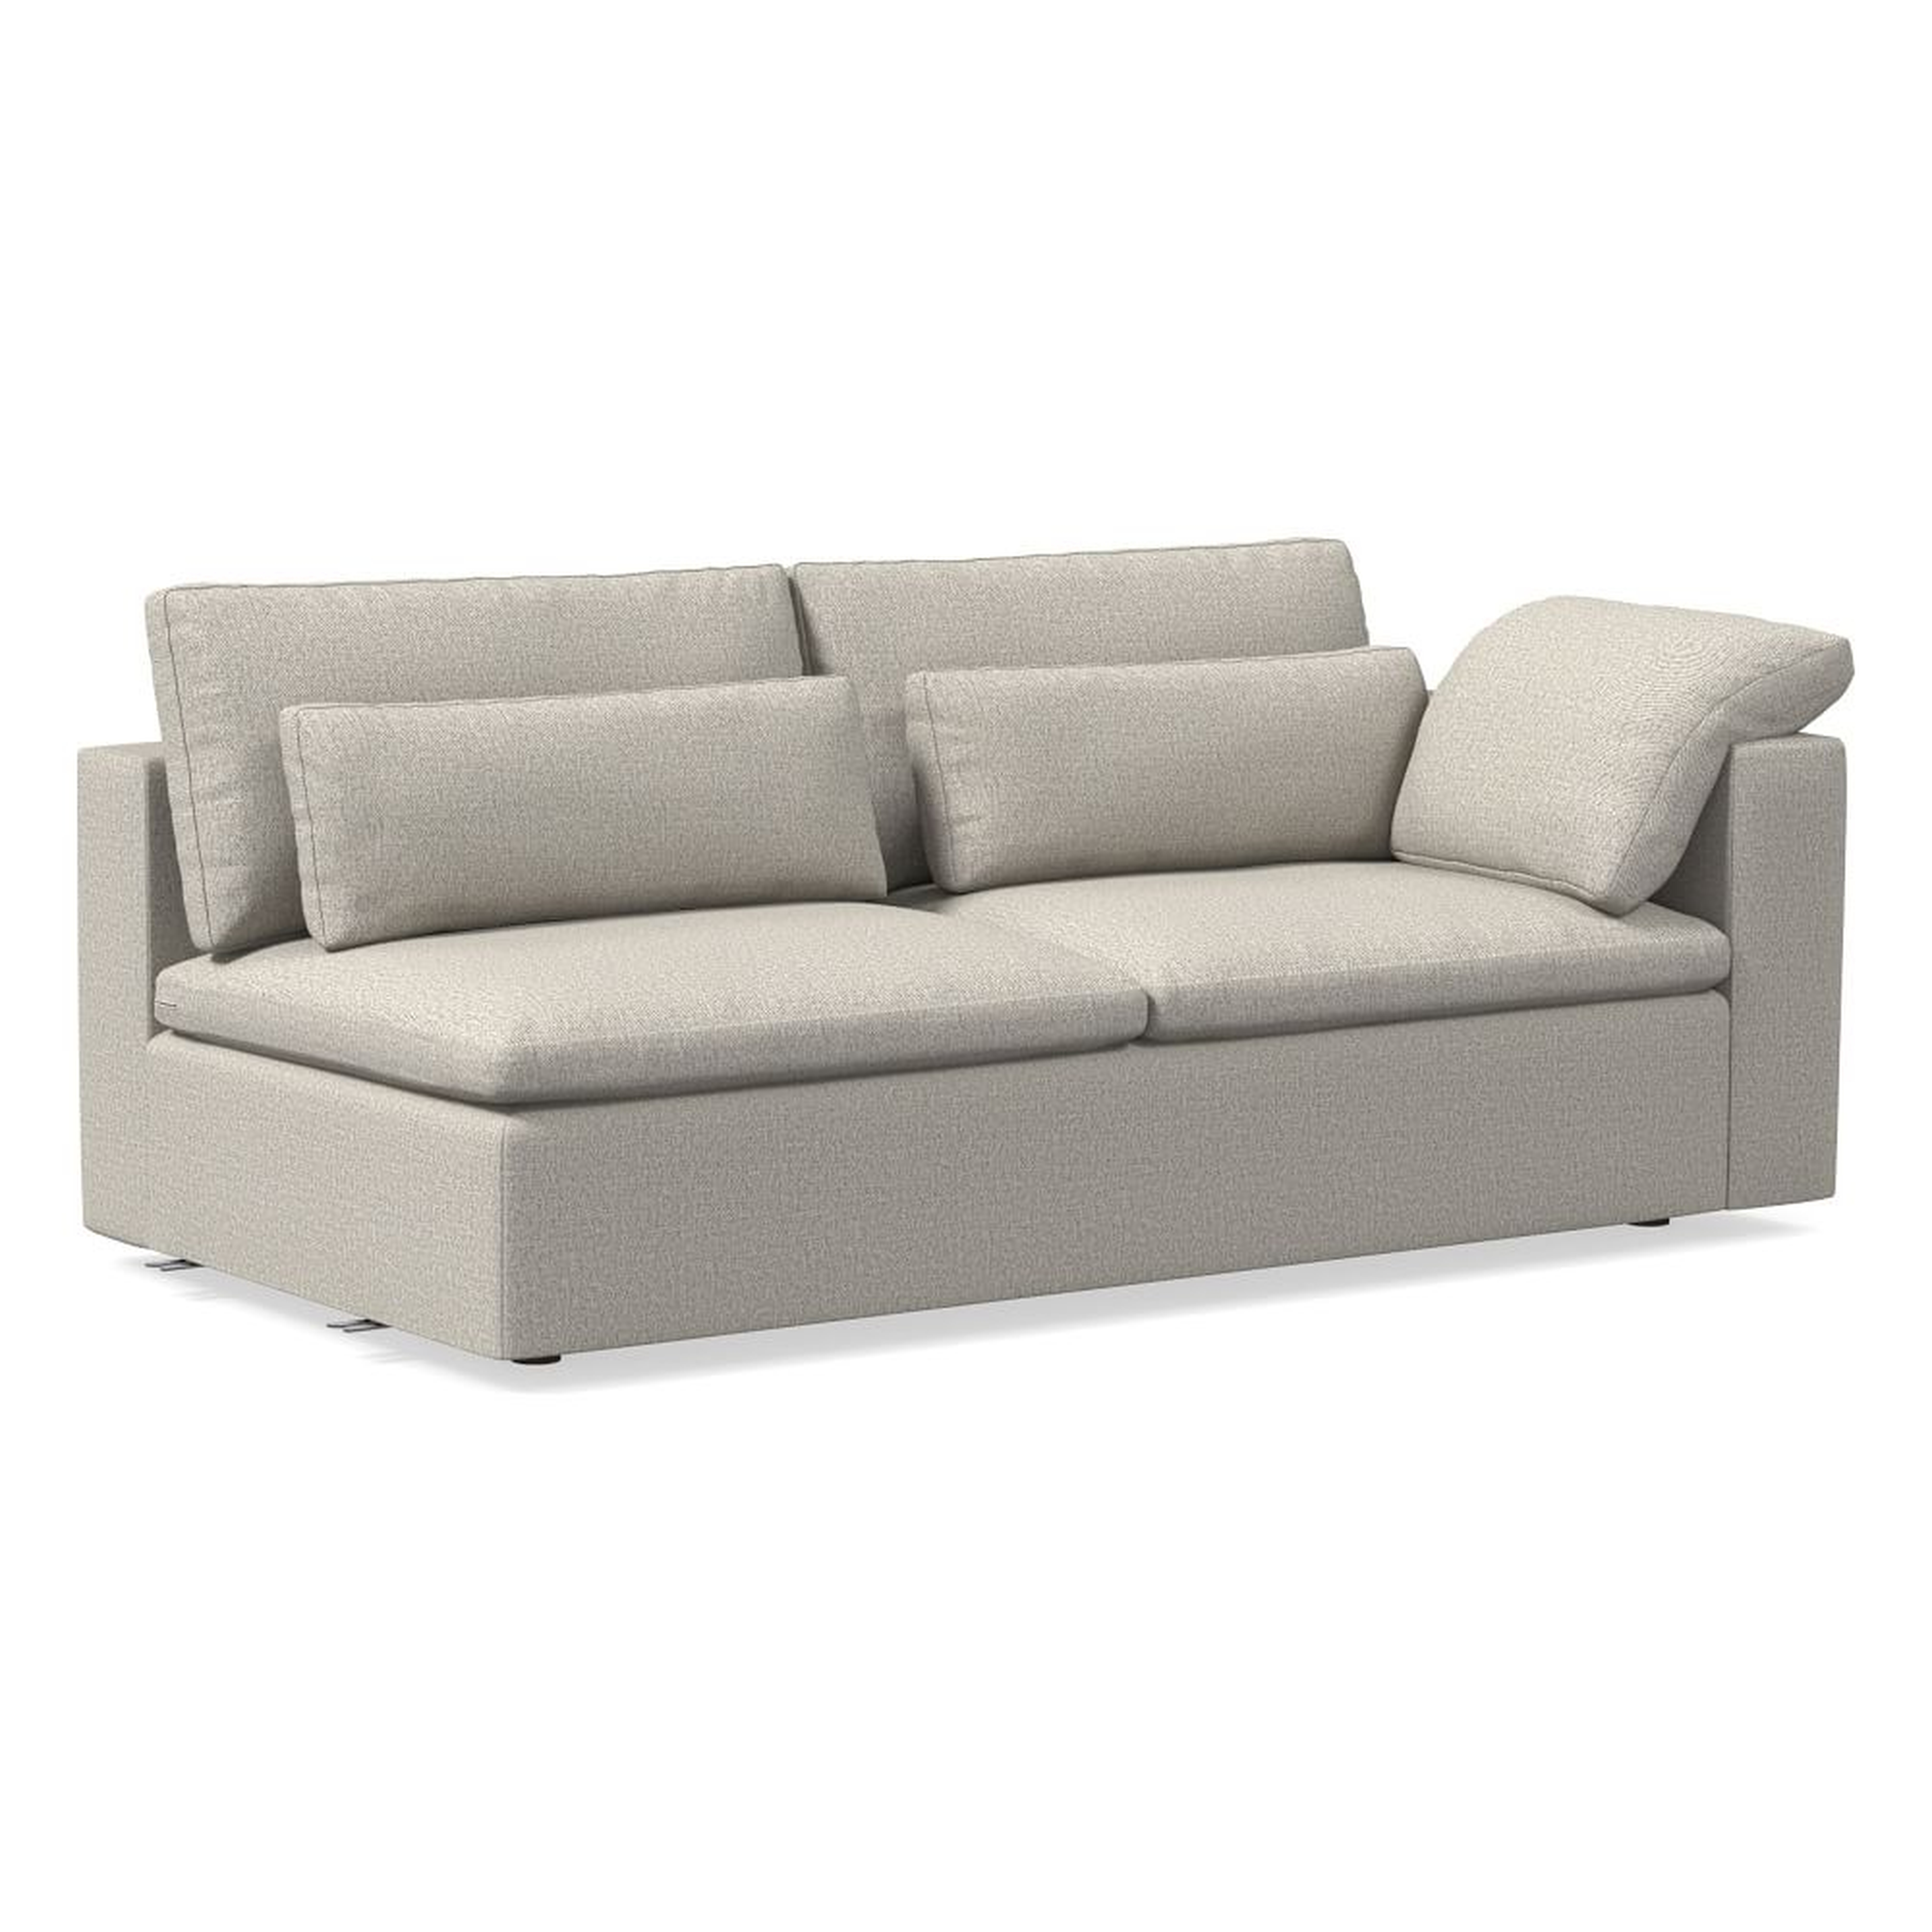 Harmony Modular Right Arm Sleeper Sofa, Down, Twill, Dove, Concealed Supports - West Elm